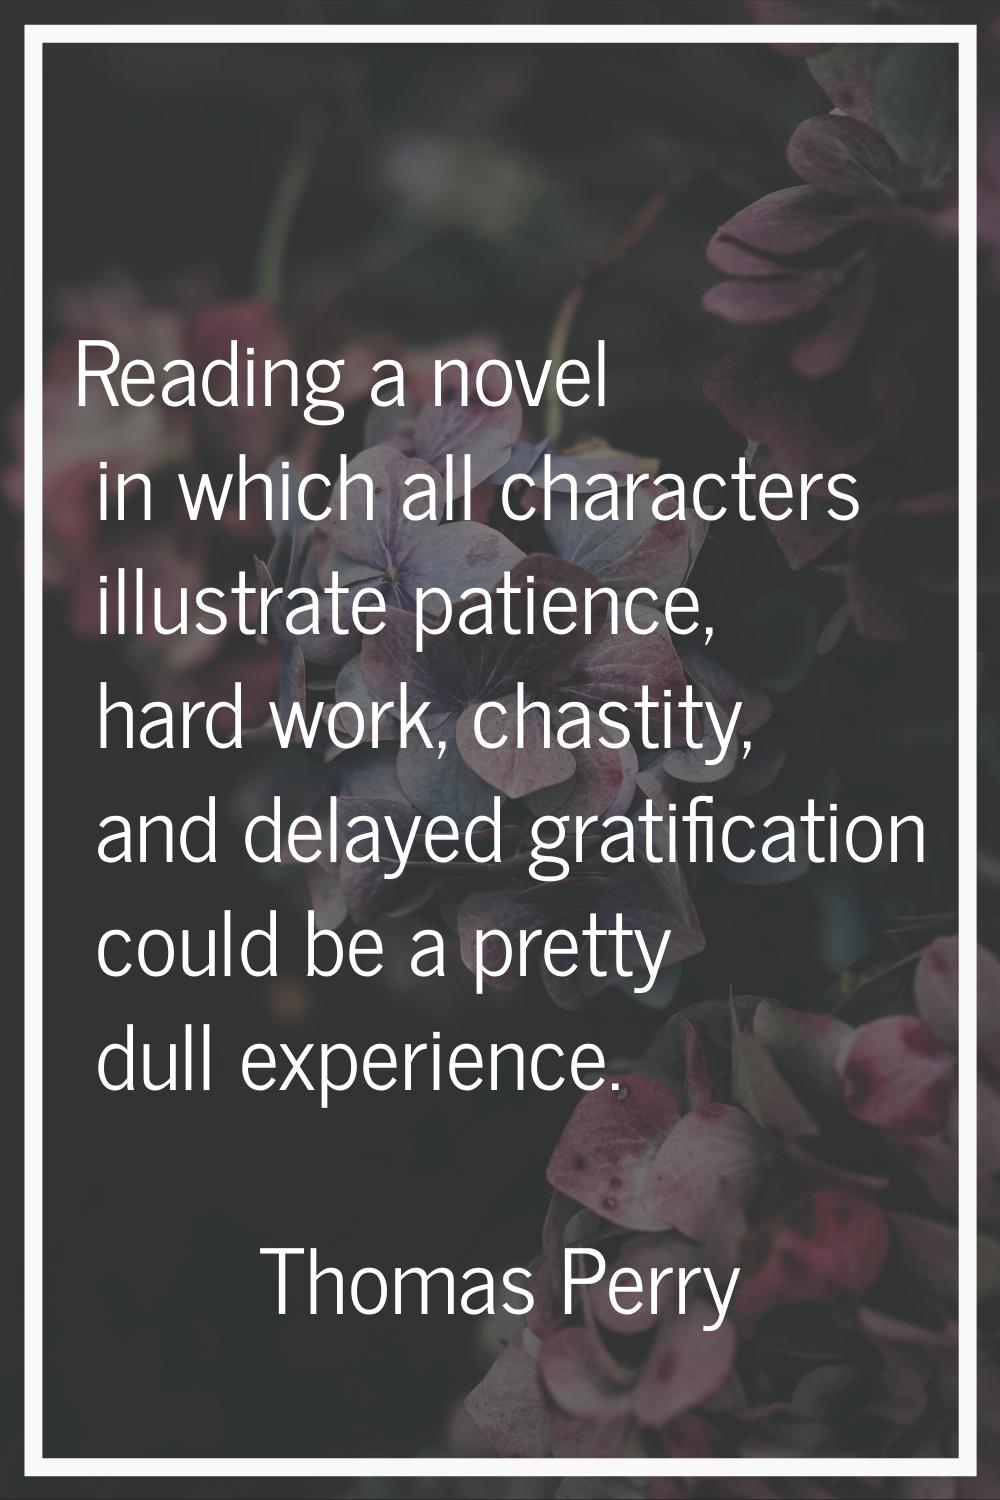 Reading a novel in which all characters illustrate patience, hard work, chastity, and delayed grati